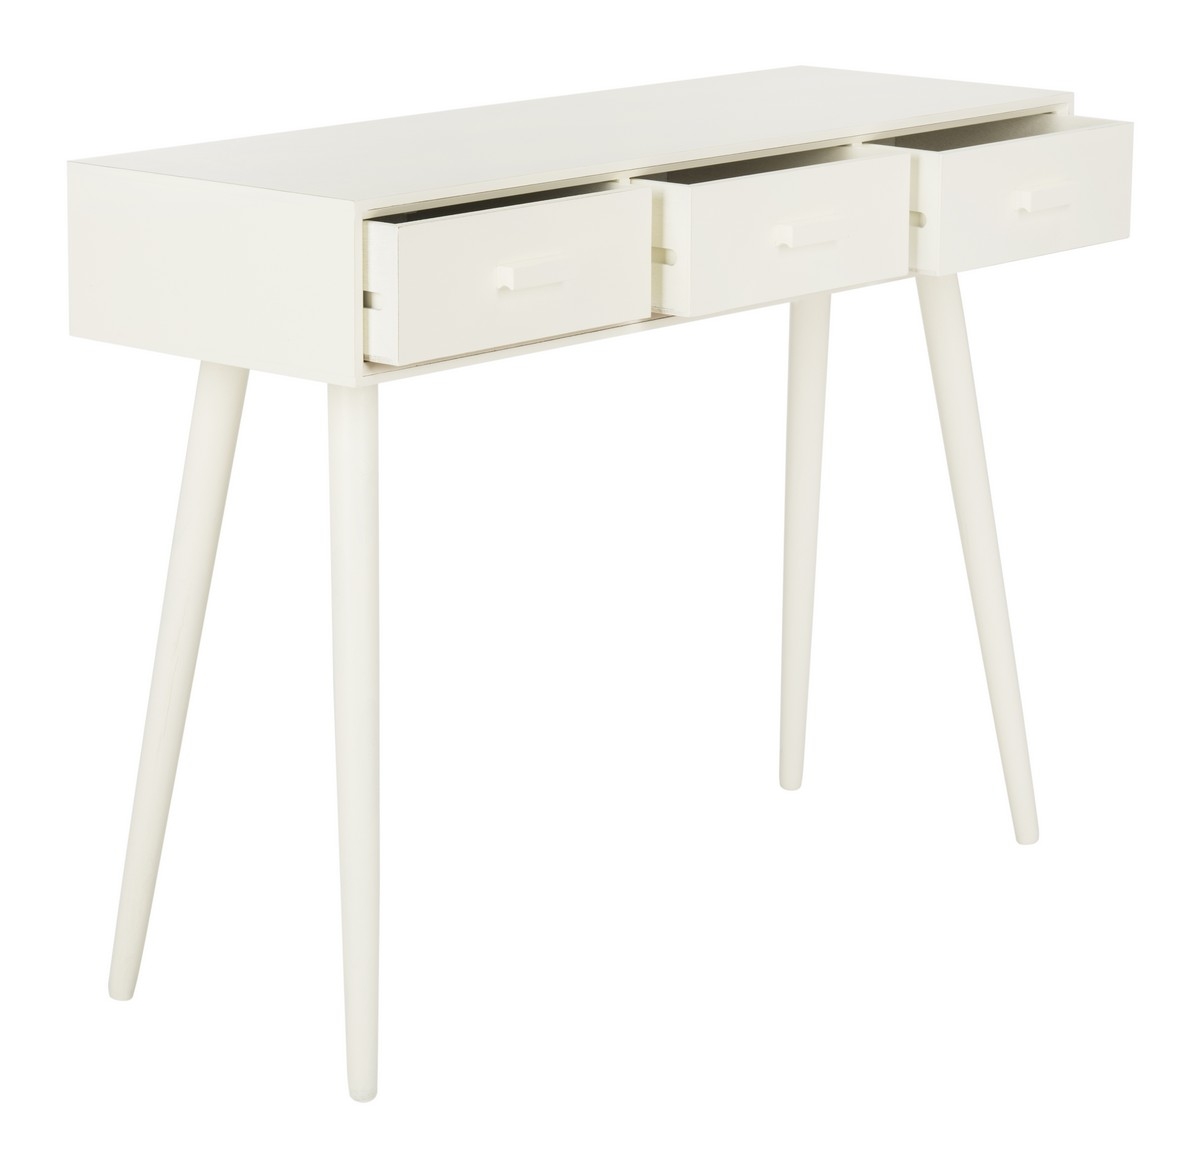 Albus 3 Drawer Console Table - Antique/White - Arlo Home - Image 1